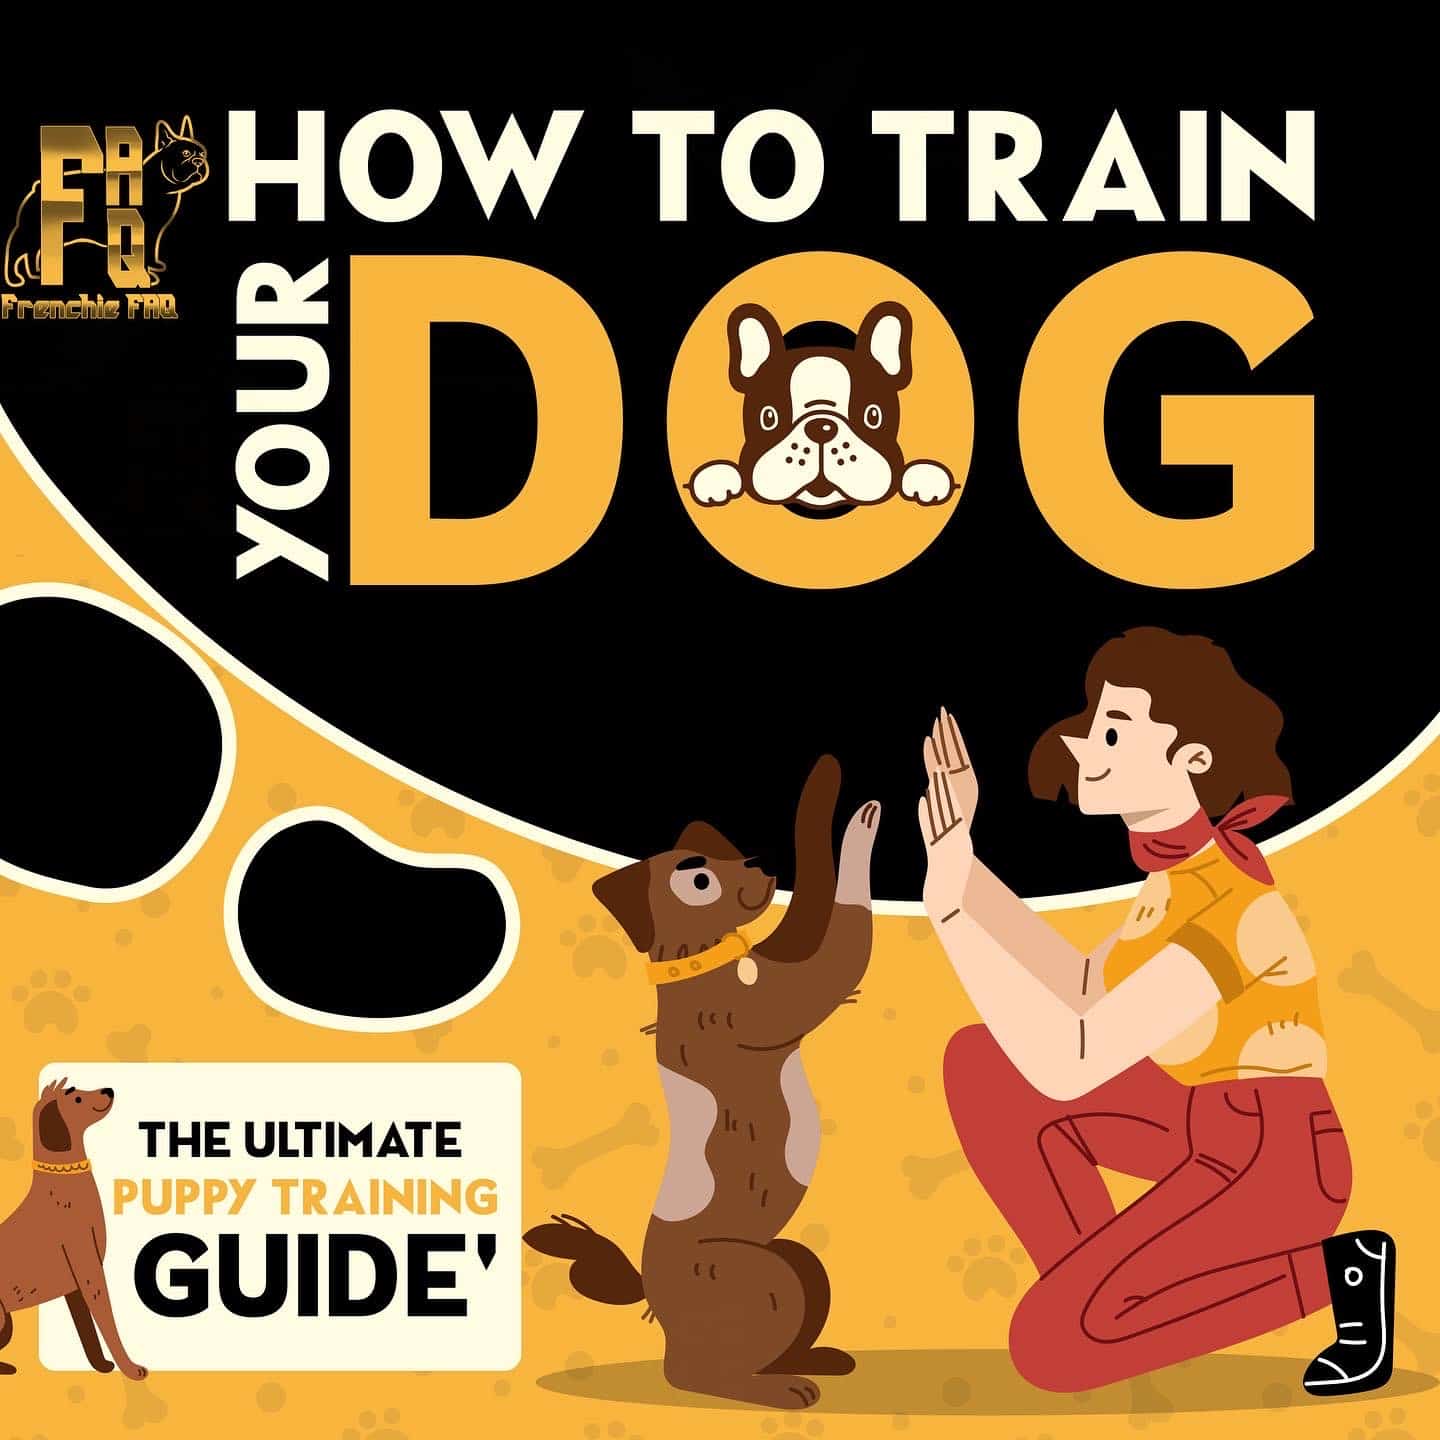 How to Potty Train A Puppy: The Ultimate Guide